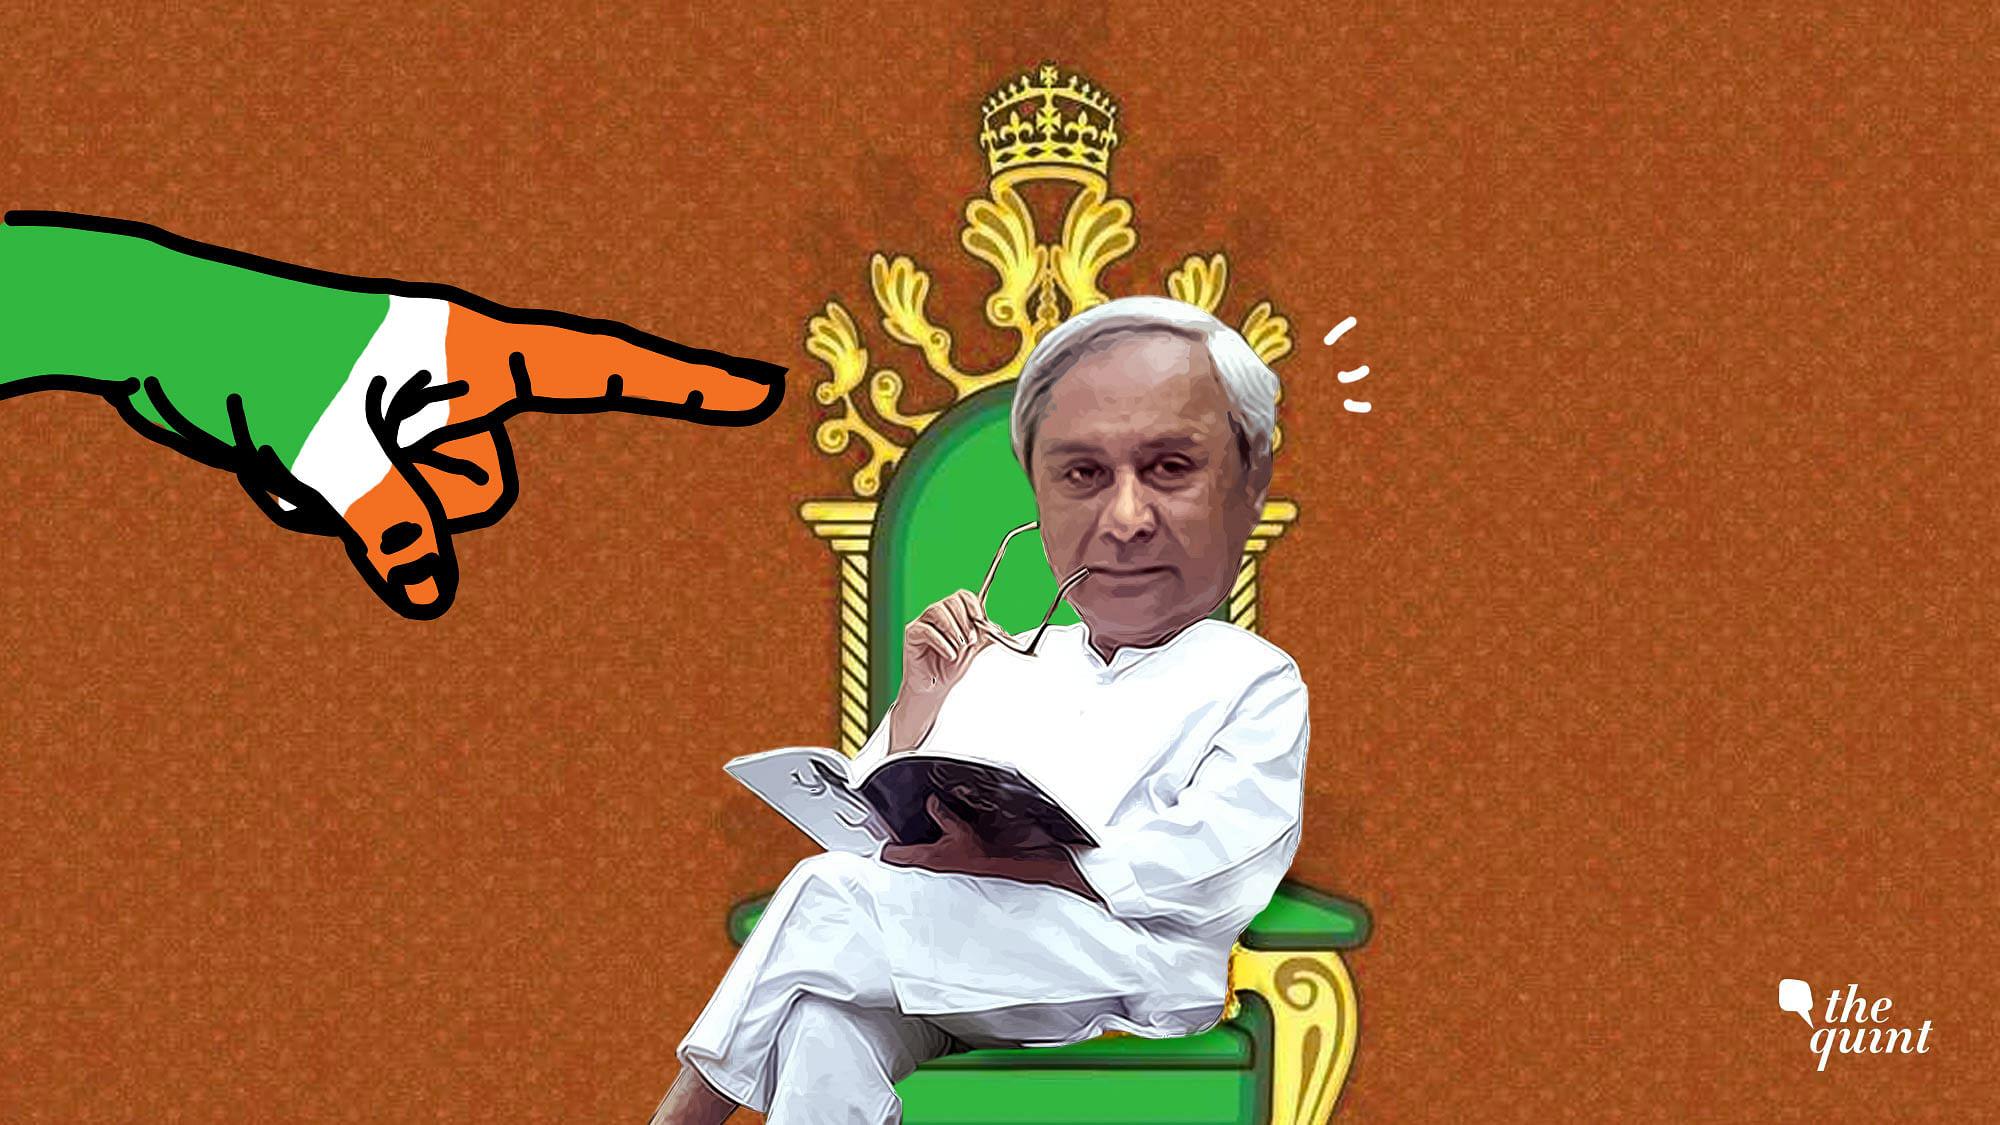 Image of Odisha CM Naveen Patnaik and a hand in the Congress’s colours, used for representational purposes.